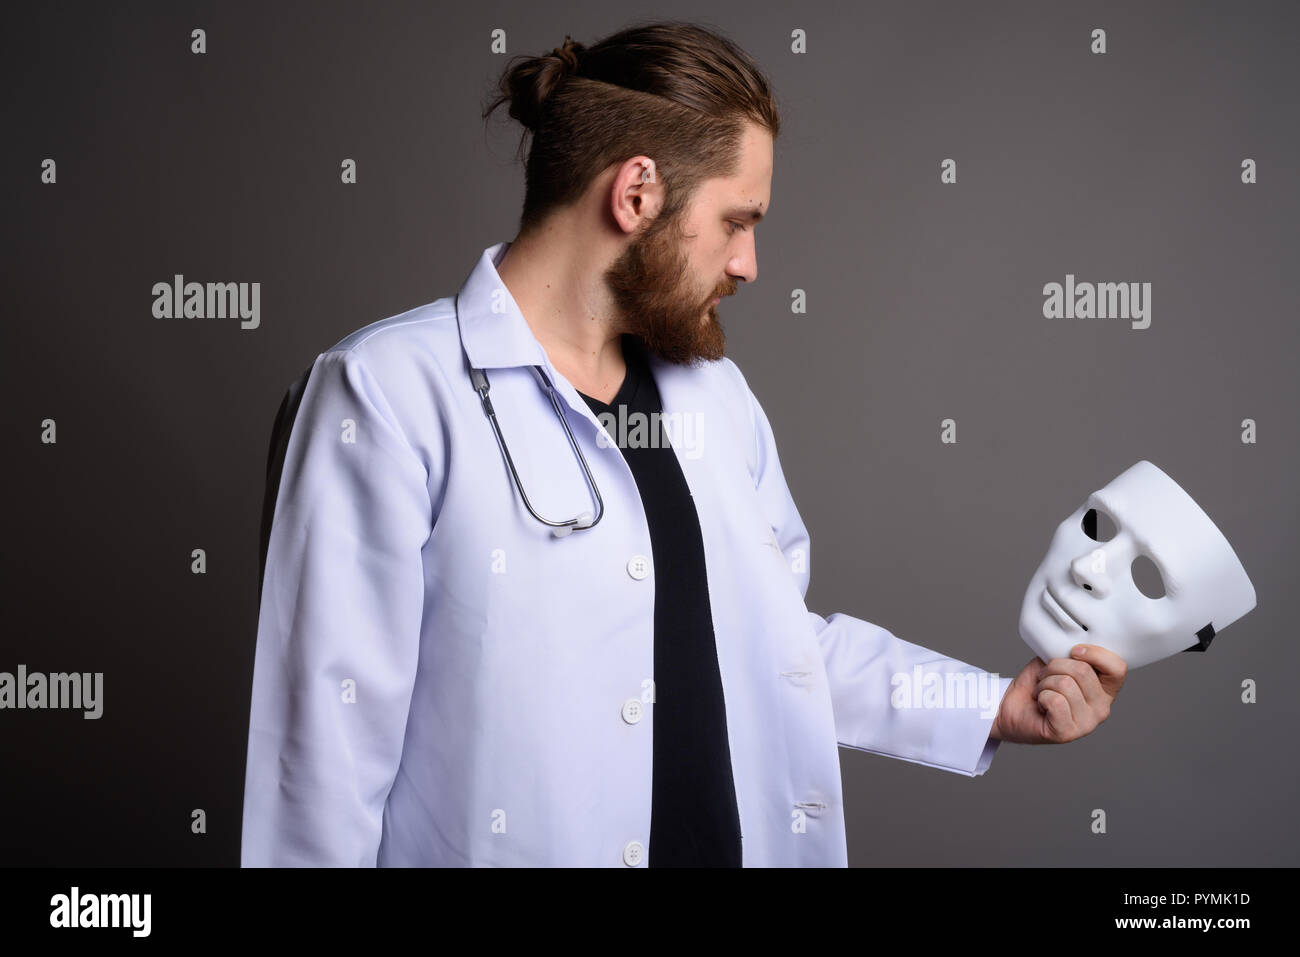 Young bearded man doctor against gray background Stock Photo